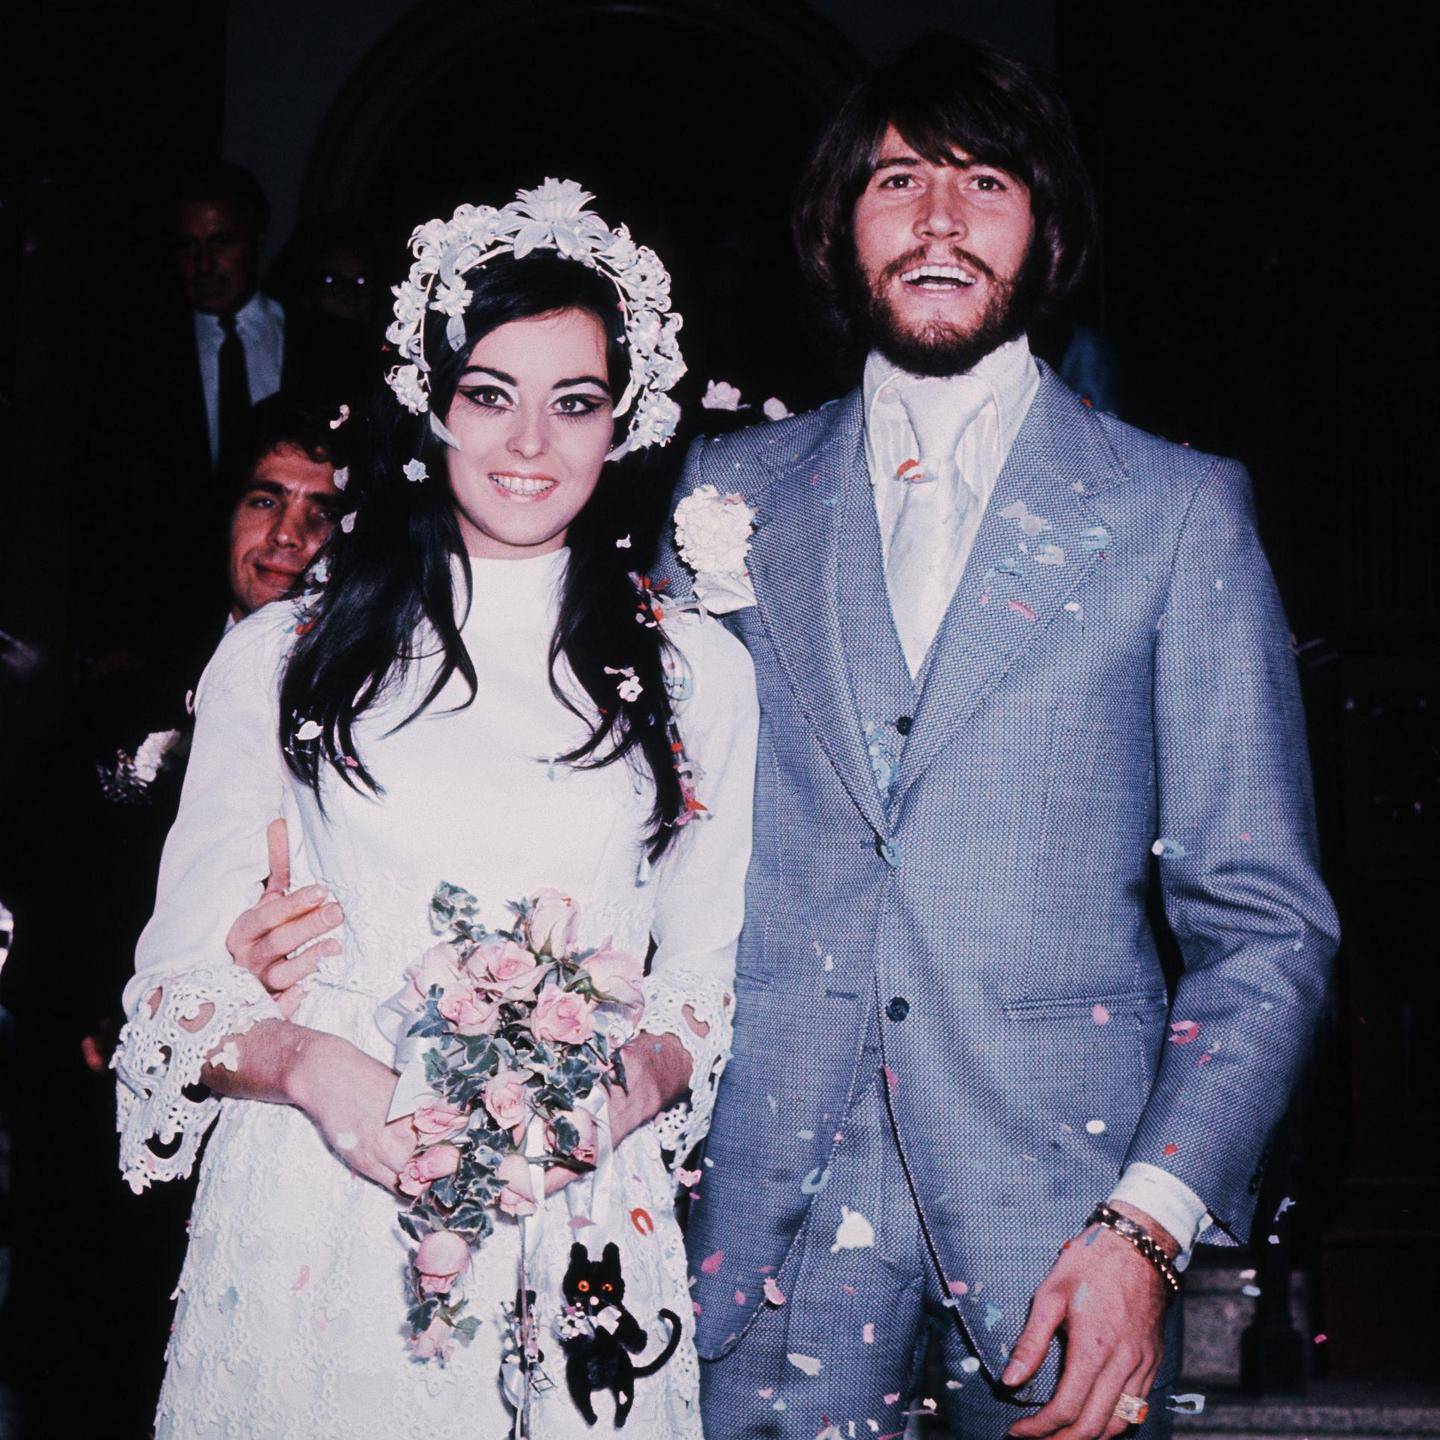 Barry Gibb: ‘My brothers had to deal with their demons, but my wife wasn’t going to have it’